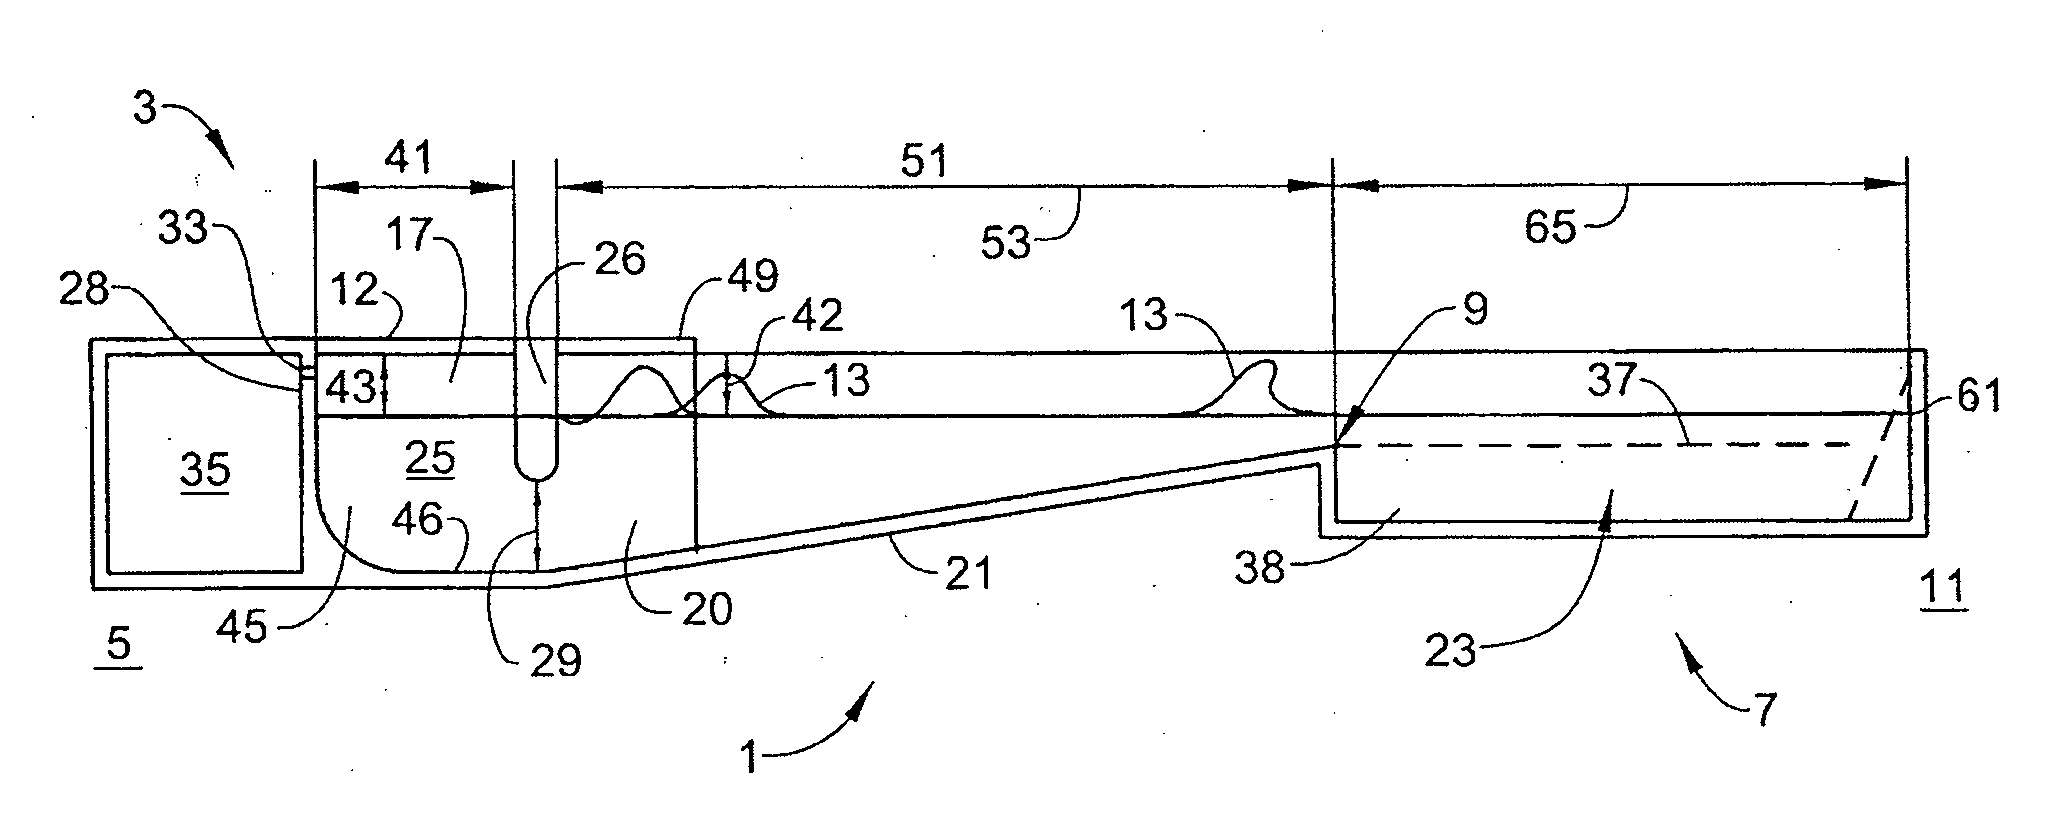 Method and apparatus for producing progressive waves suitable for surfing using staggered wave generators in sequence